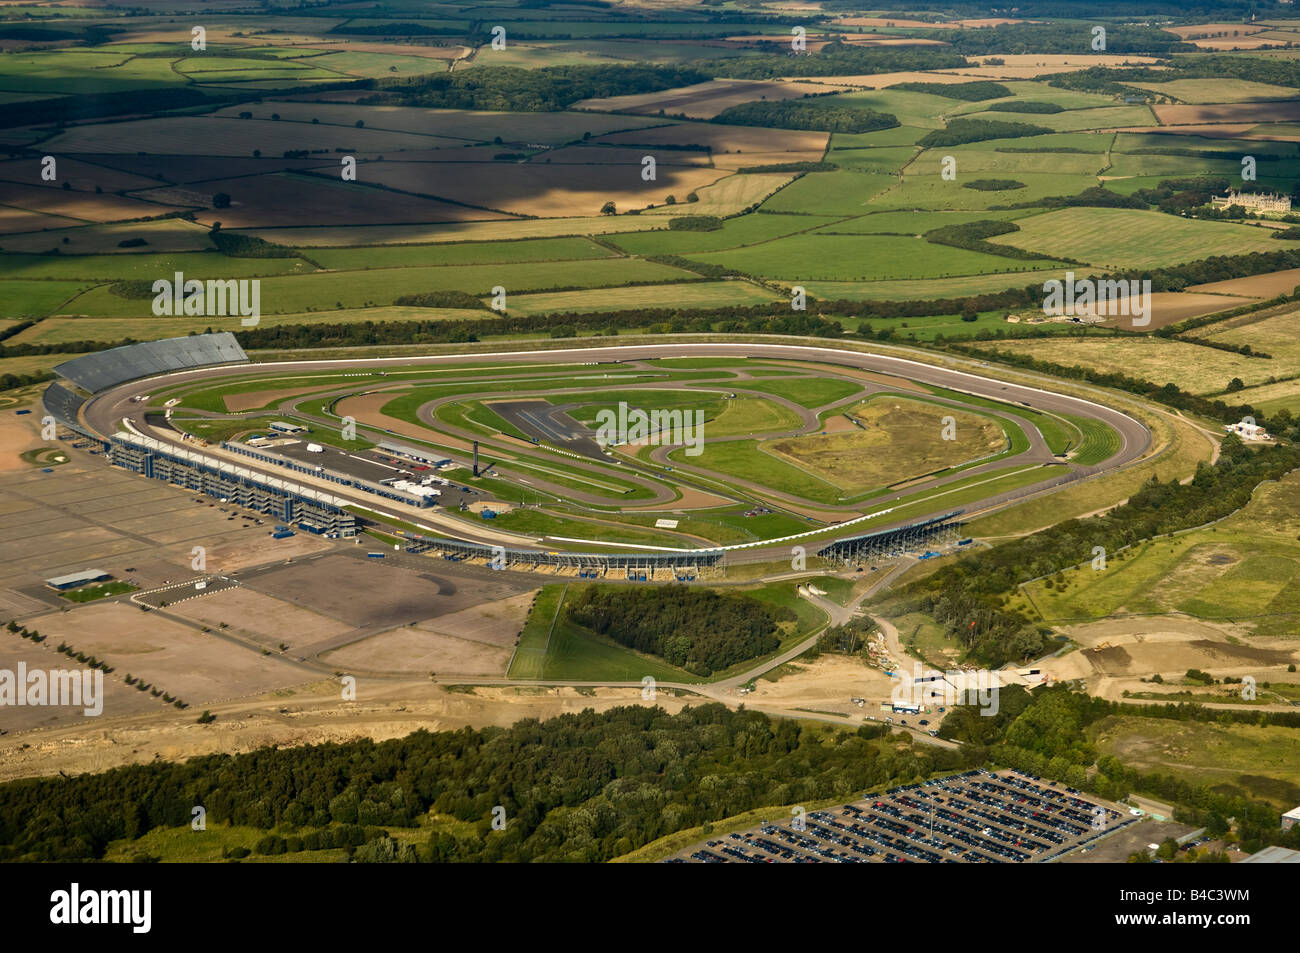 Aerial photograph of Rockingham Motor Speedway near to Corby Northamptonshire Stock Photo